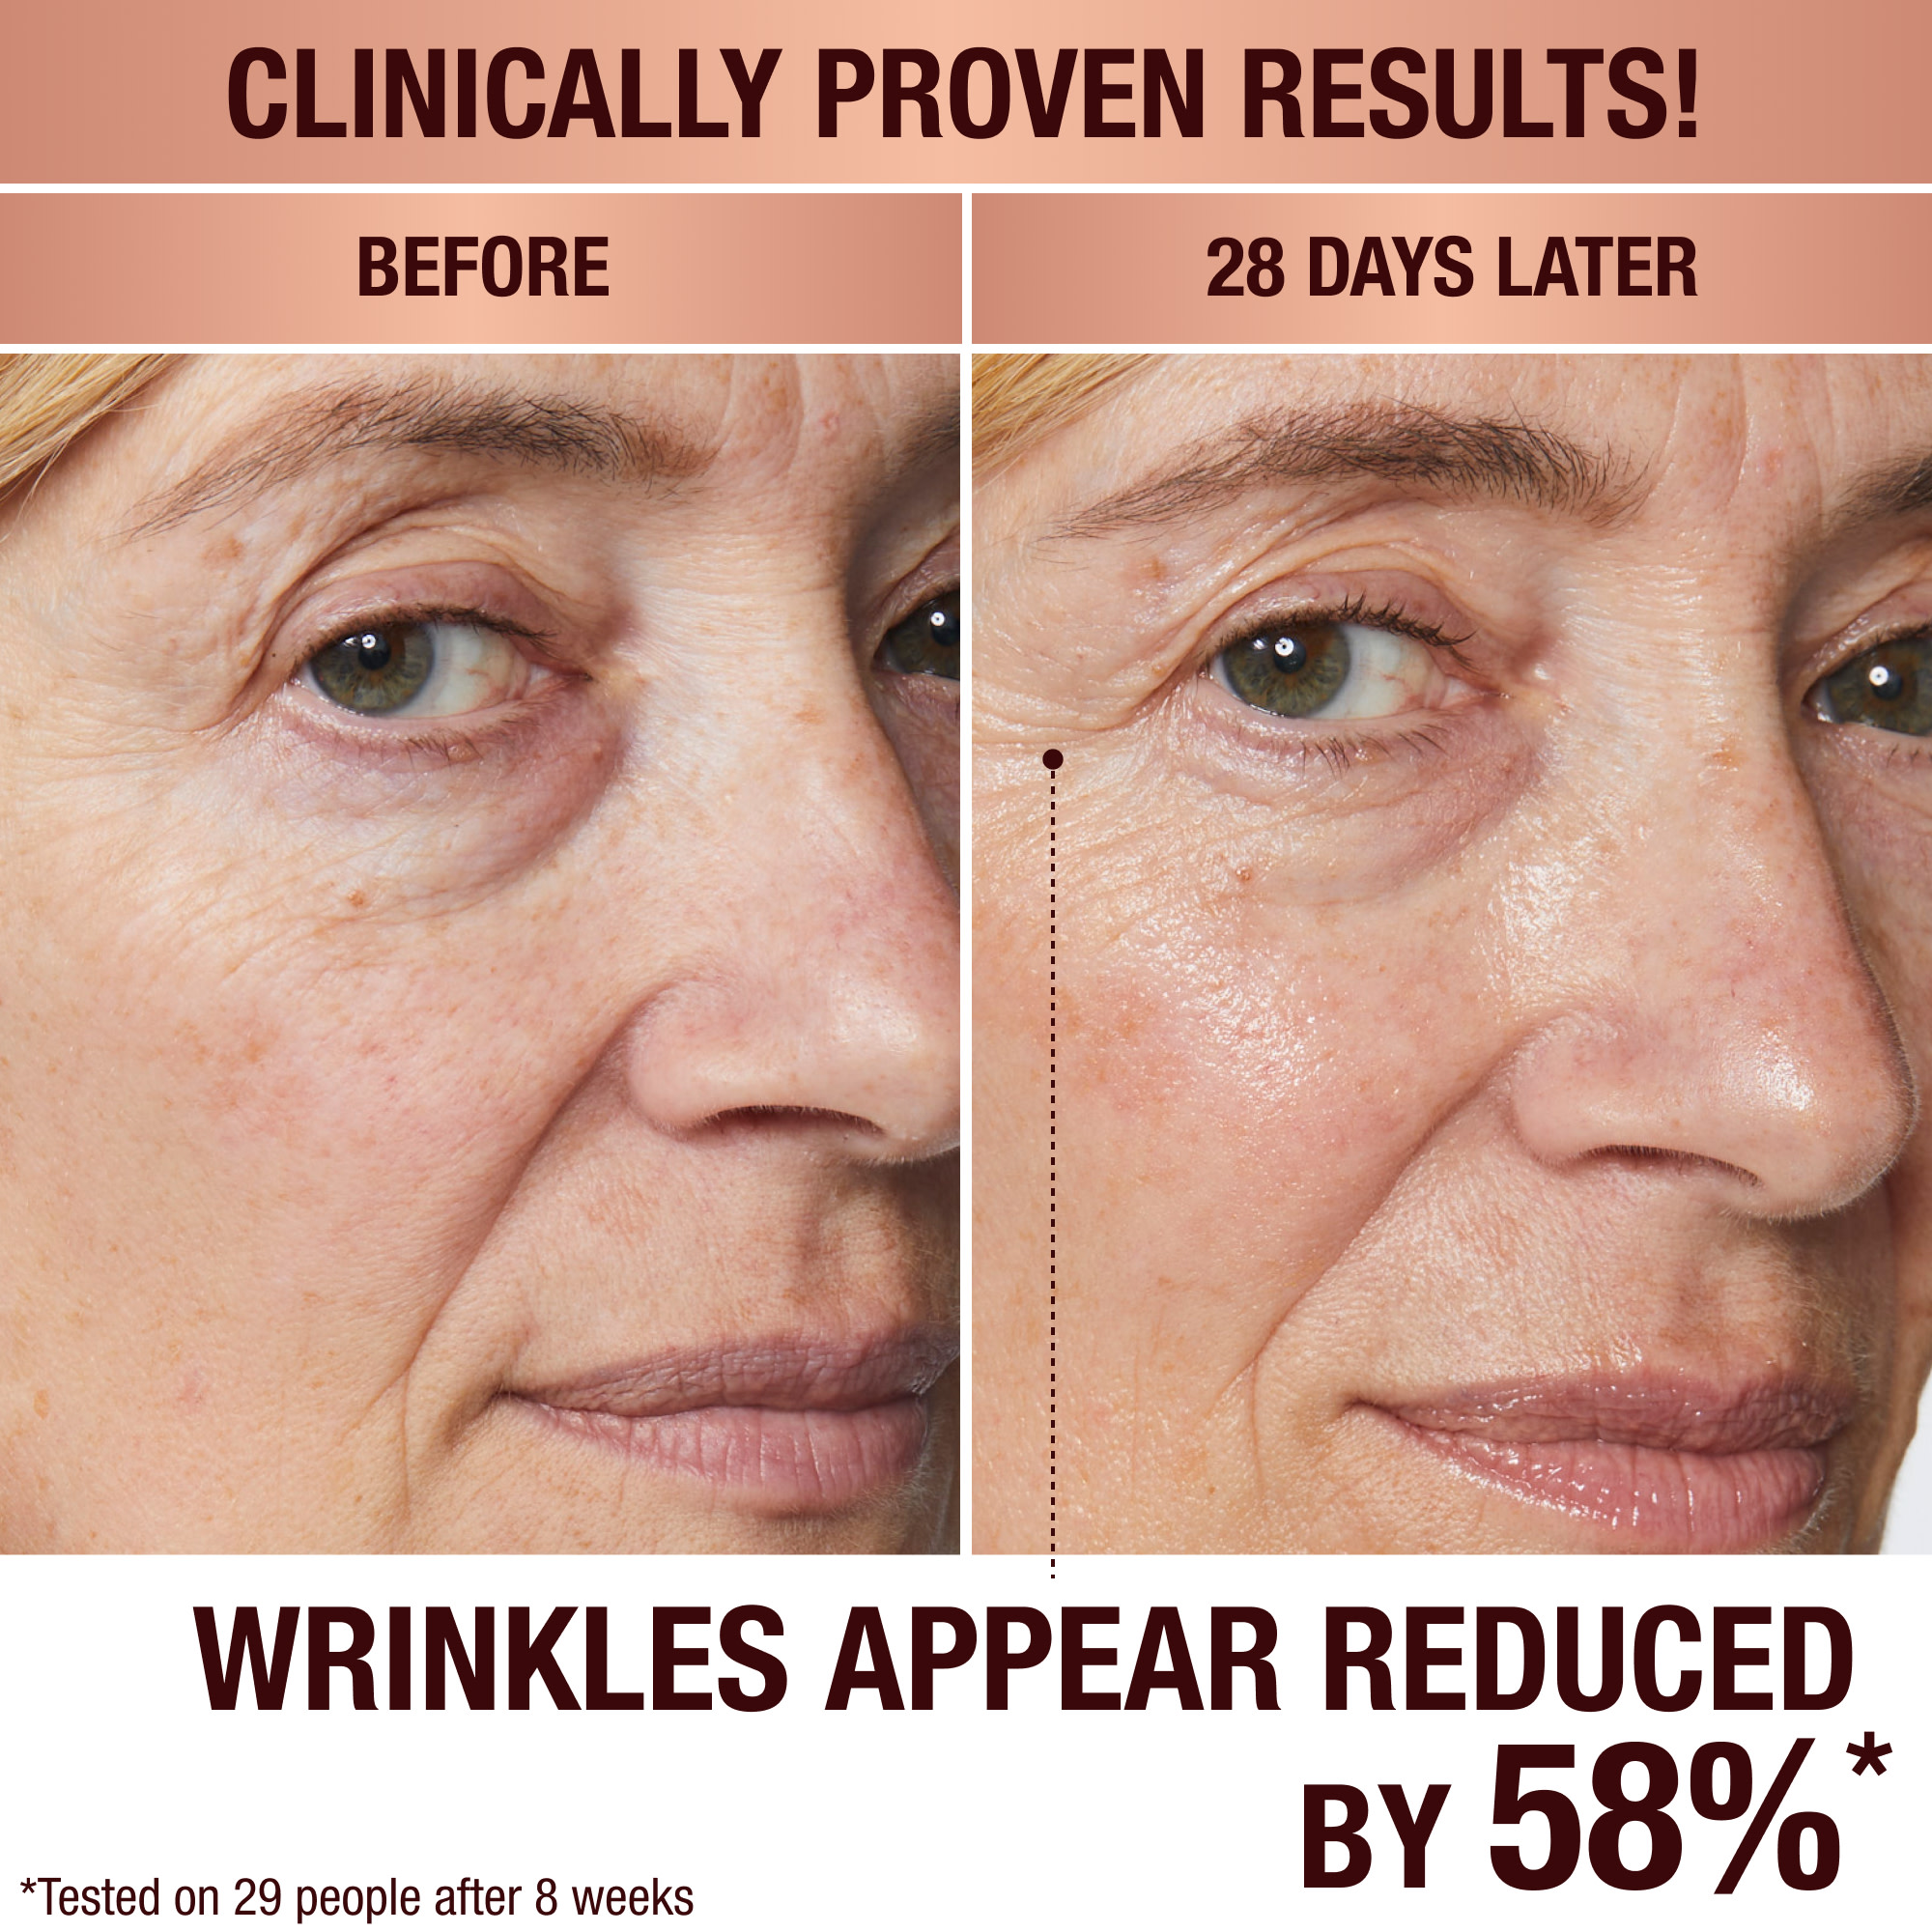 Before and after image showing anti-ageing results of mature skin model using Magic Cream for 28 days